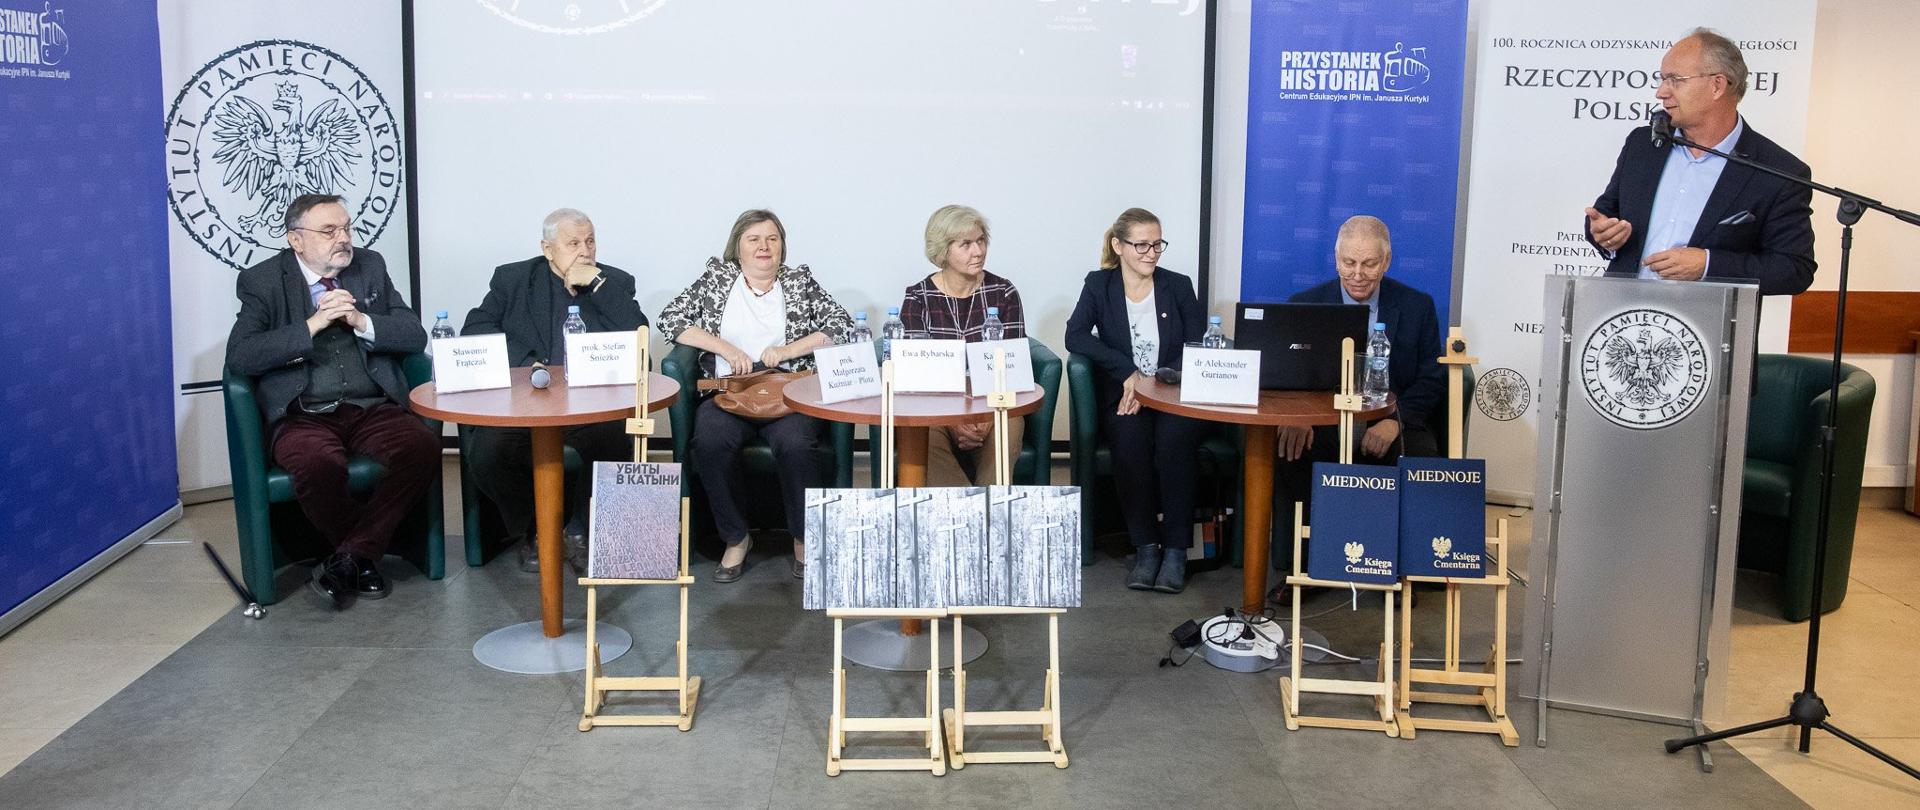 Presentation of the book "Killed in Kalinin, buried in Miednoje"